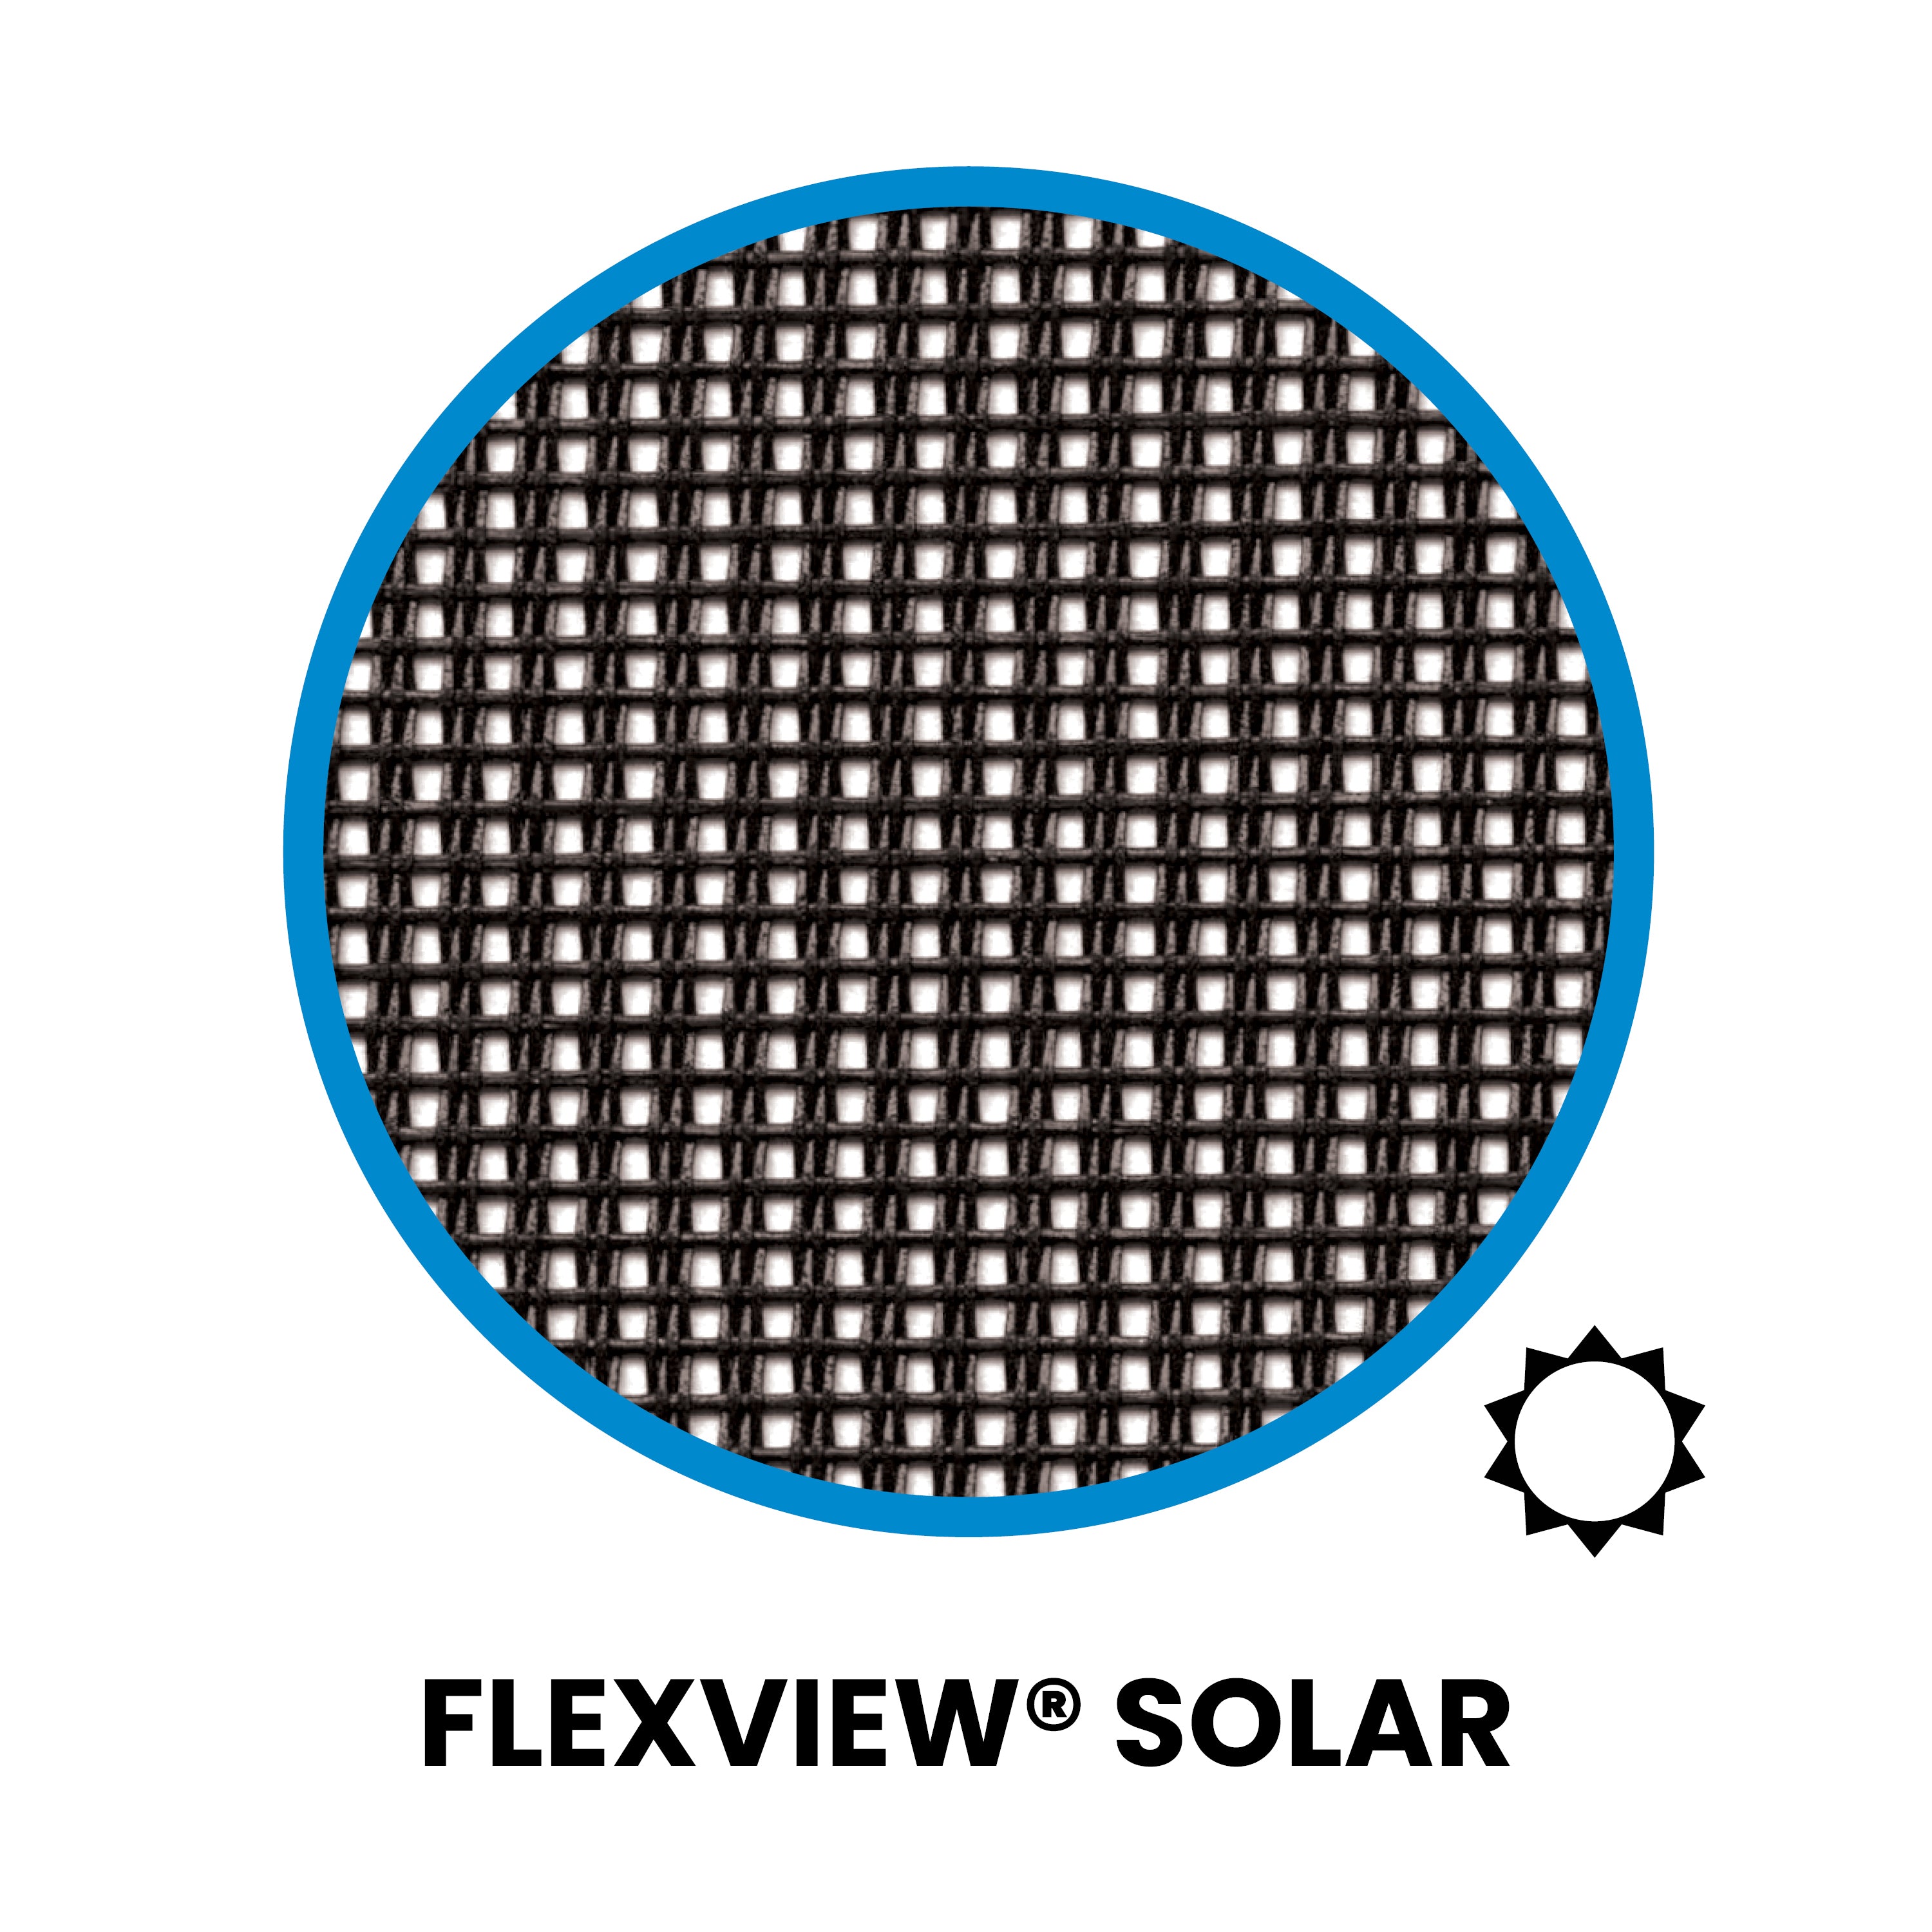 FS-Flexview-Solar_Swatch_with-Name-1.jpg__PID:000e8705-6831-4f70-ad8d-bb95663d9ce5